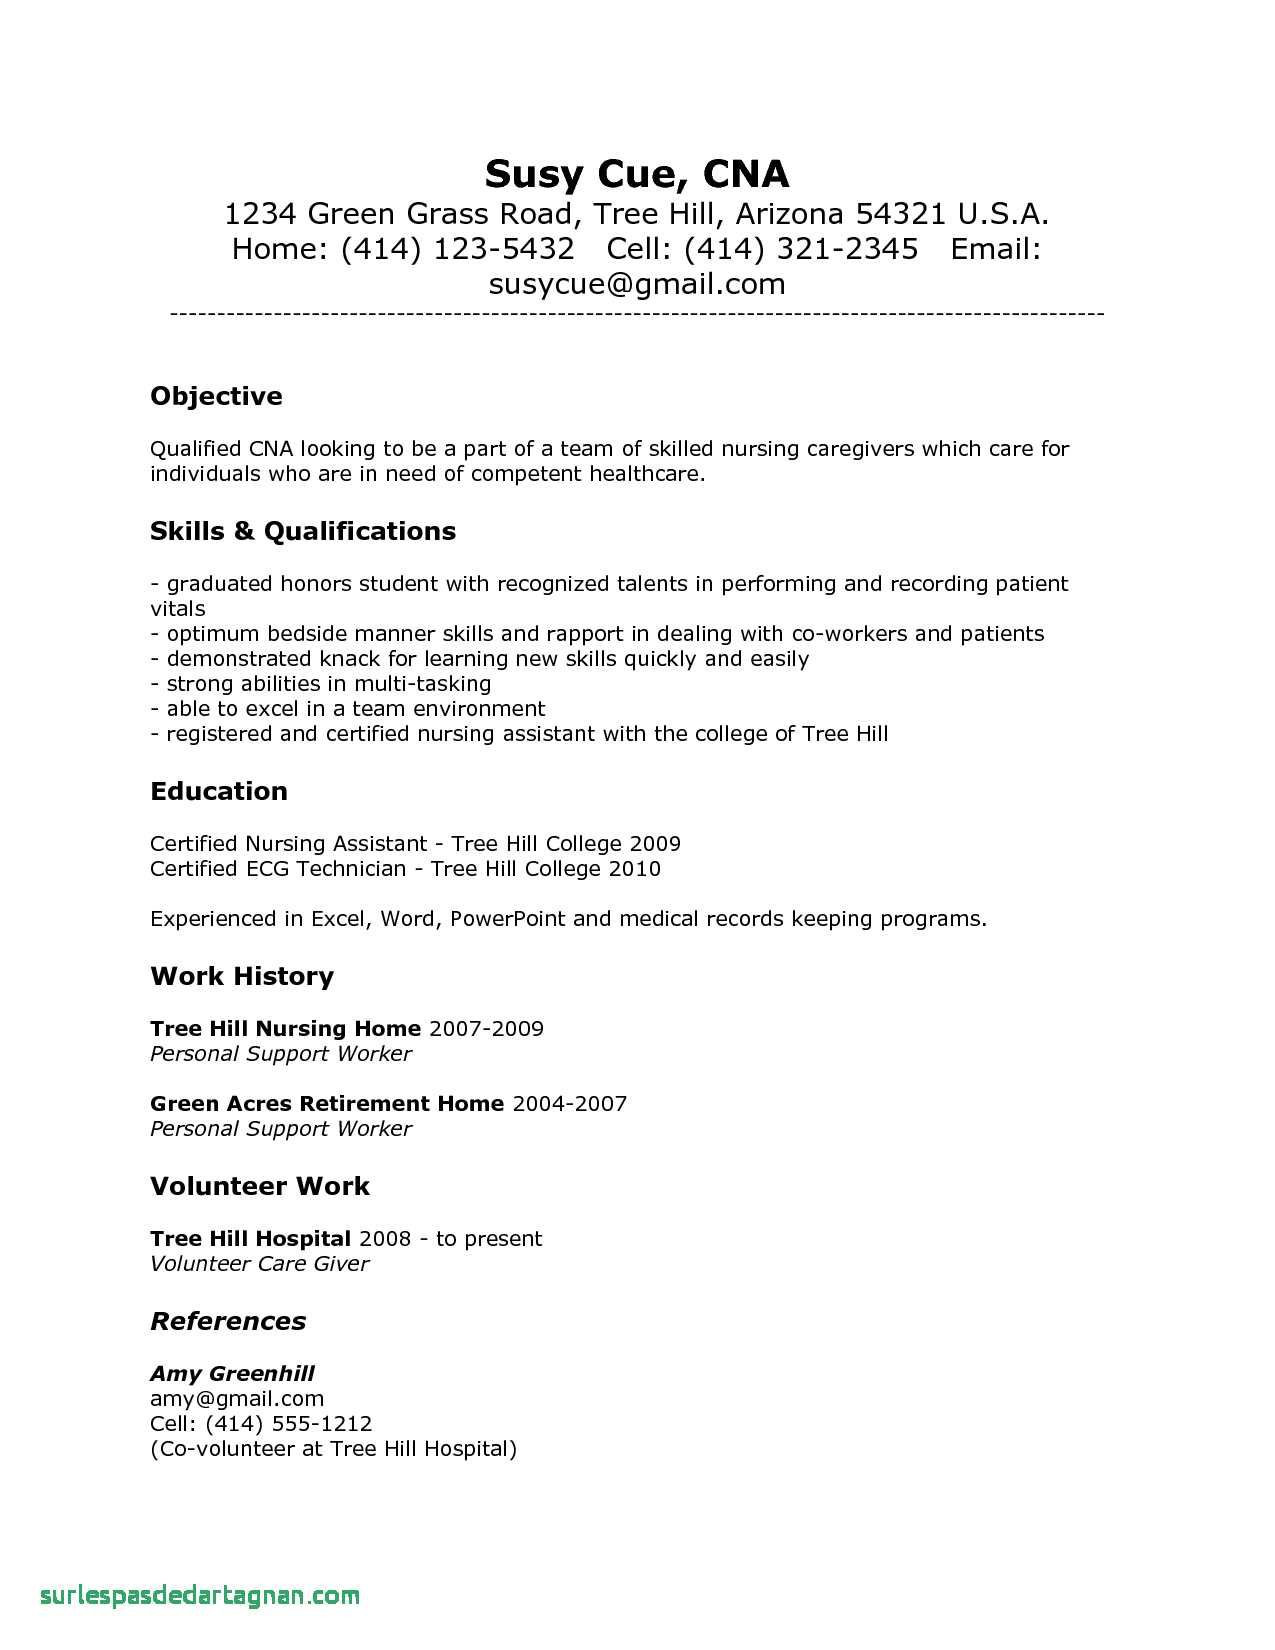 Sample Resume for Cna with No Previous Experience Pin On Resume Templates